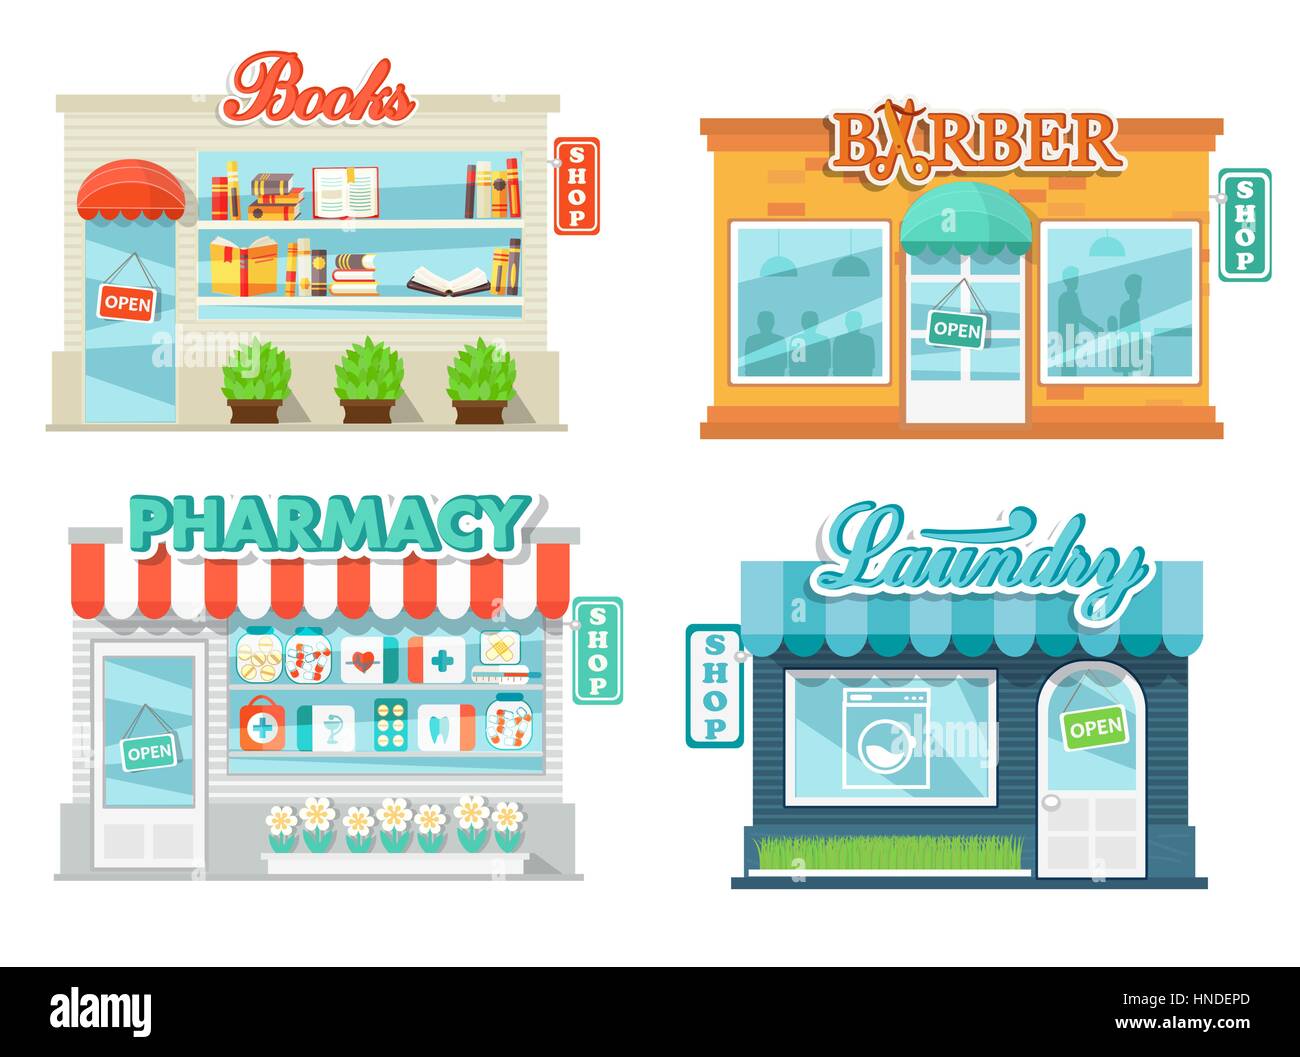 Shops and stores icons set in flat design style. Laundry, shop book, pharmacy and barbershop. Vector illustration. Stock Vector